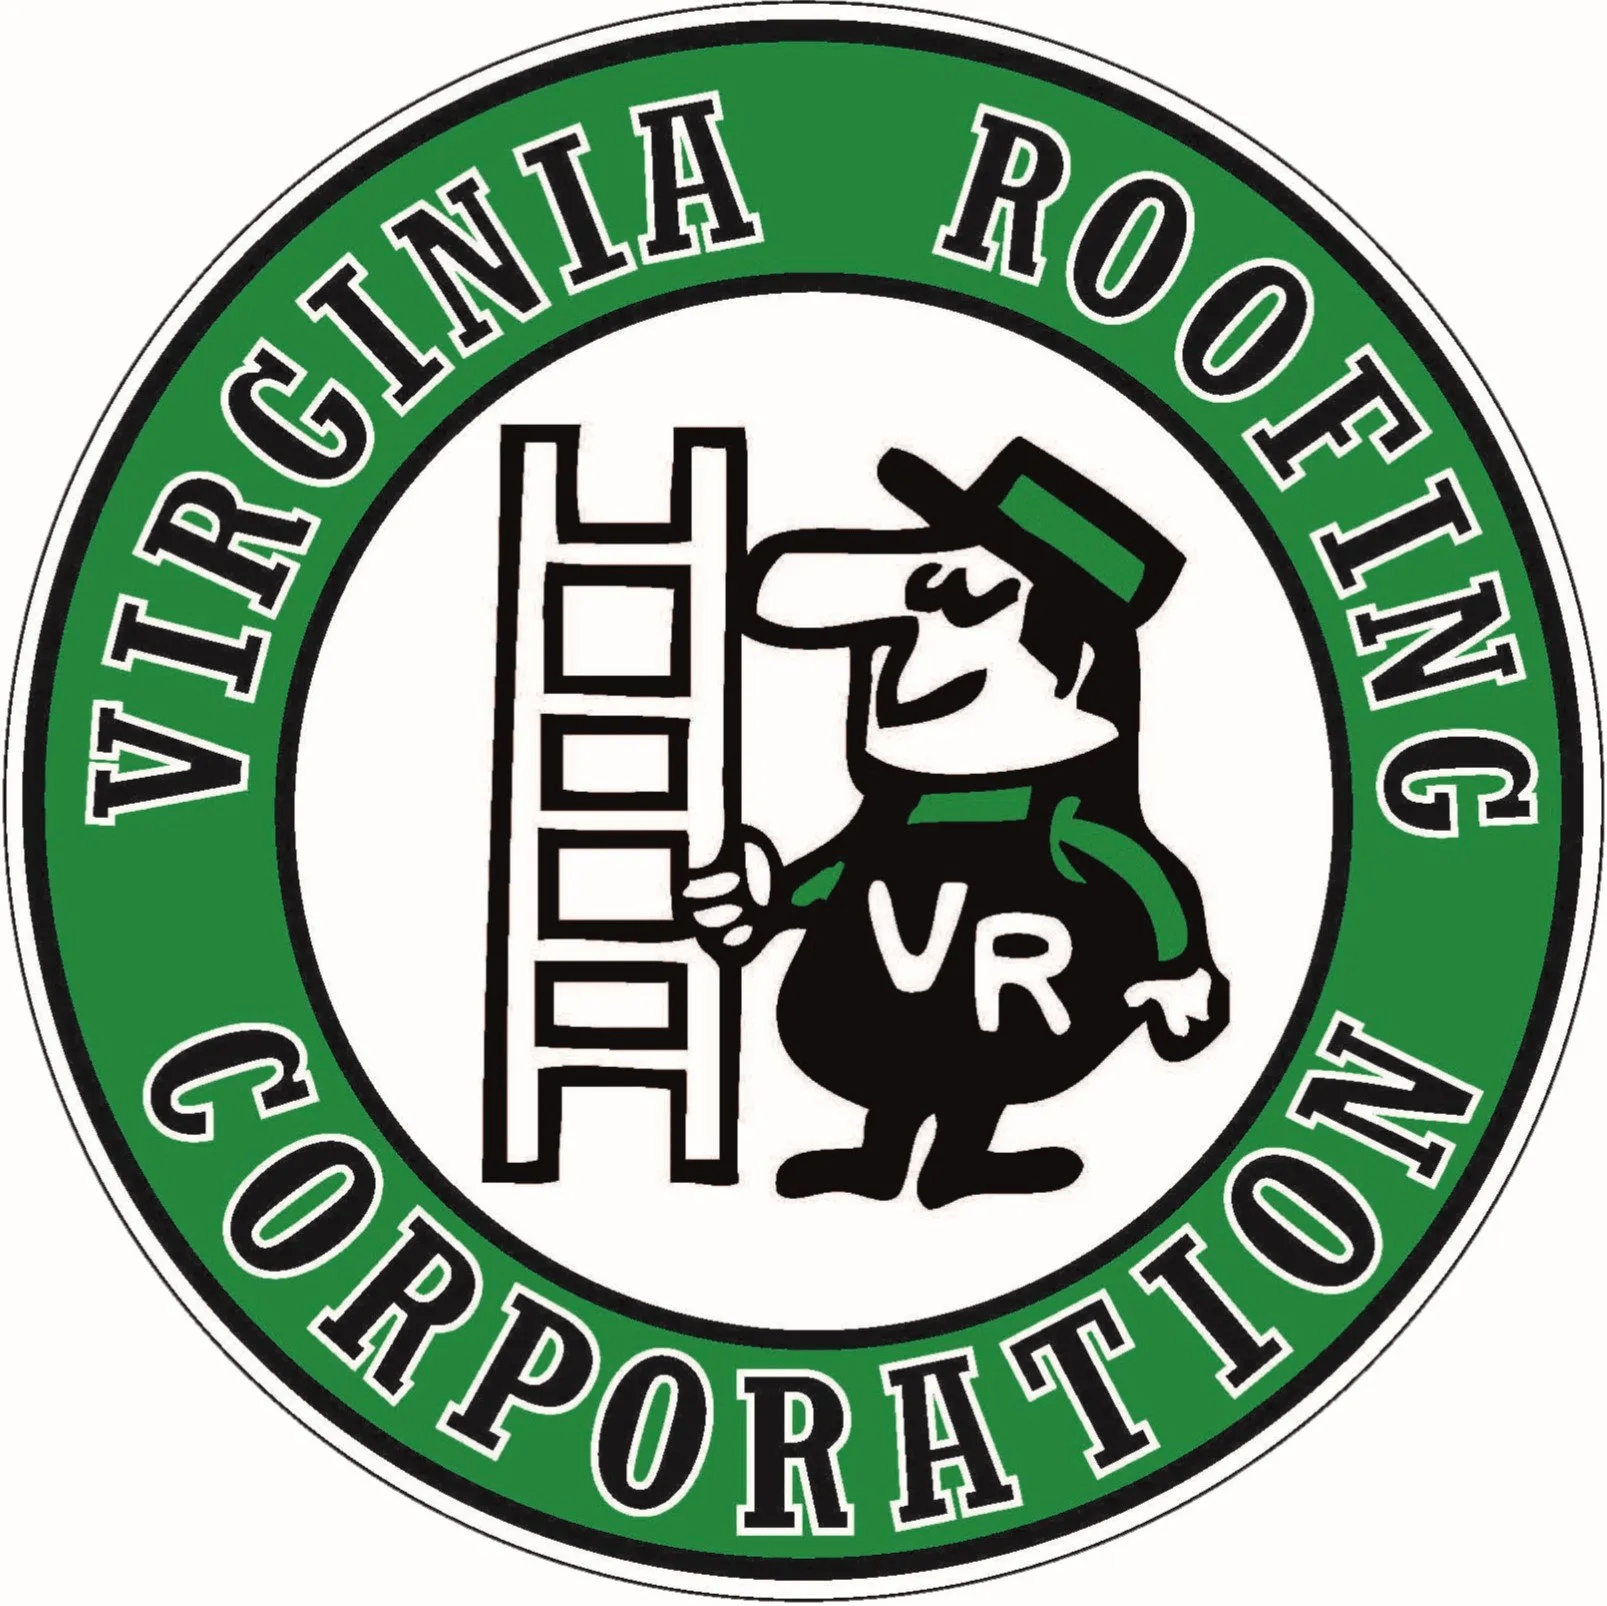 Virginia Roofing roofing company in Virginia